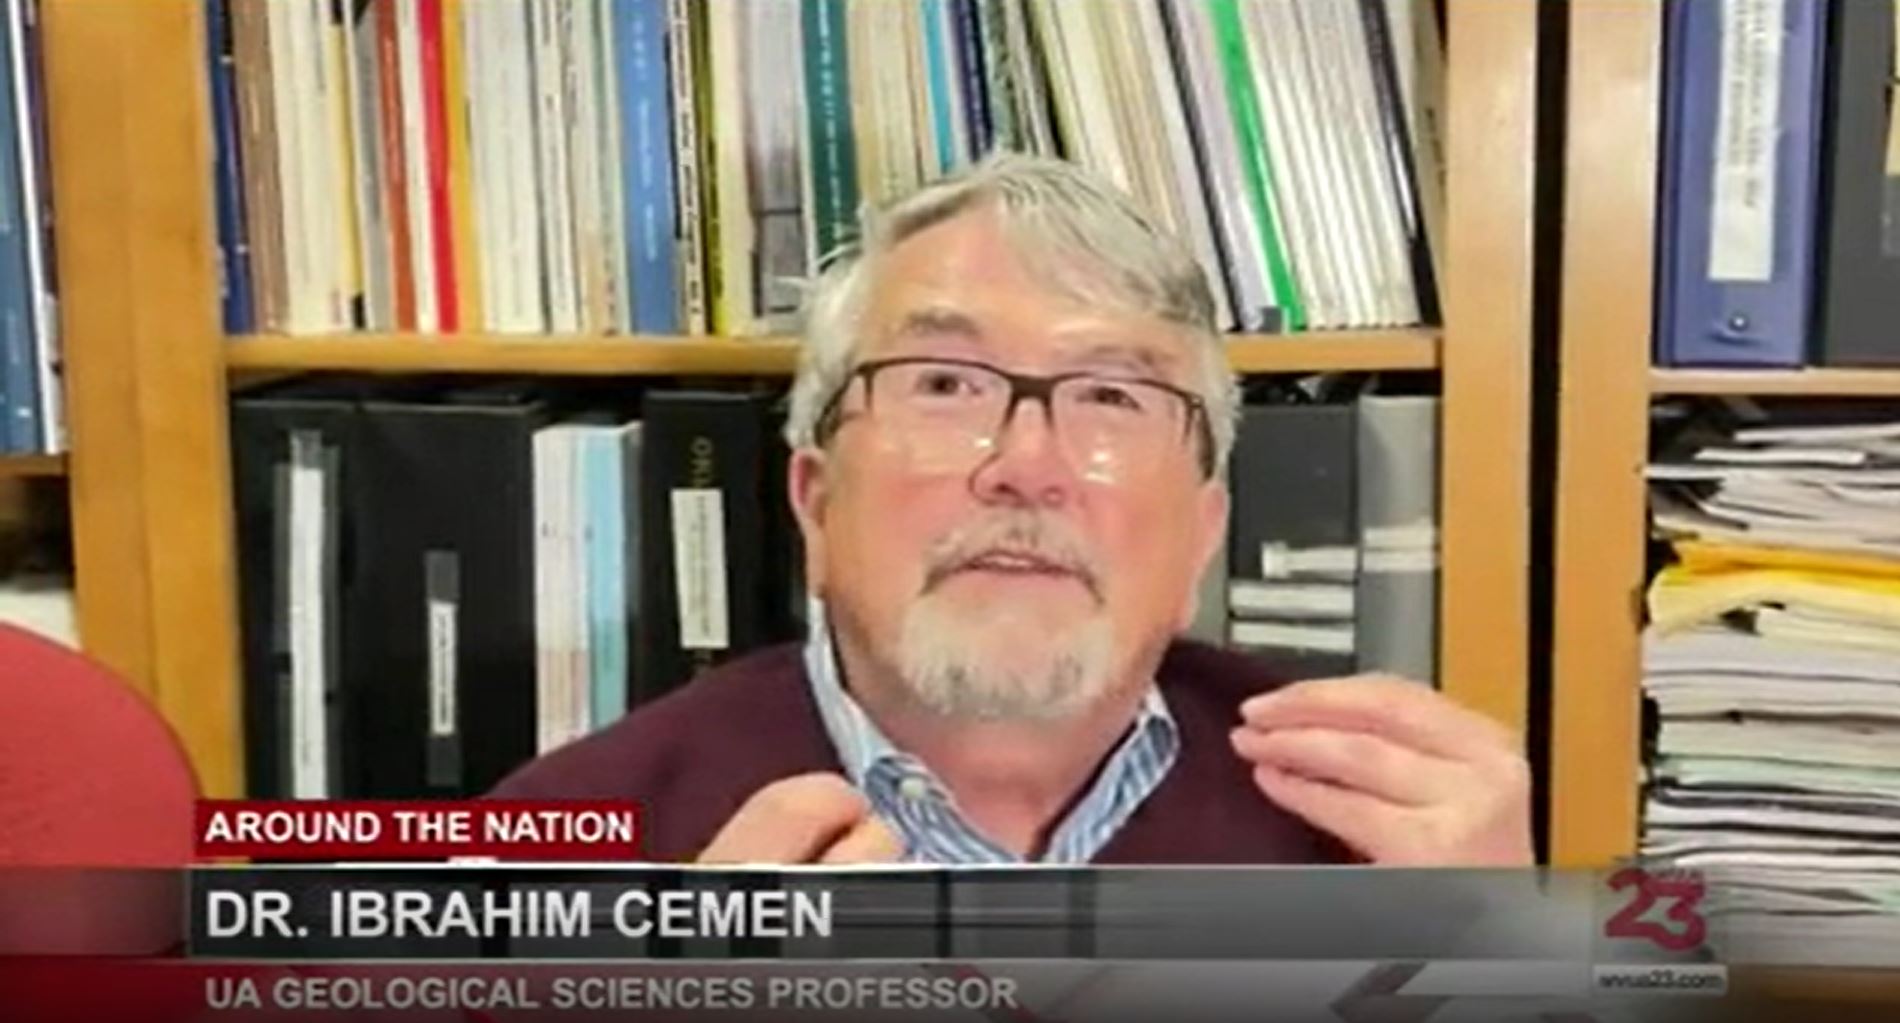 Prof. Çemen in his office, being interviewed about the earthquake in Turkey.